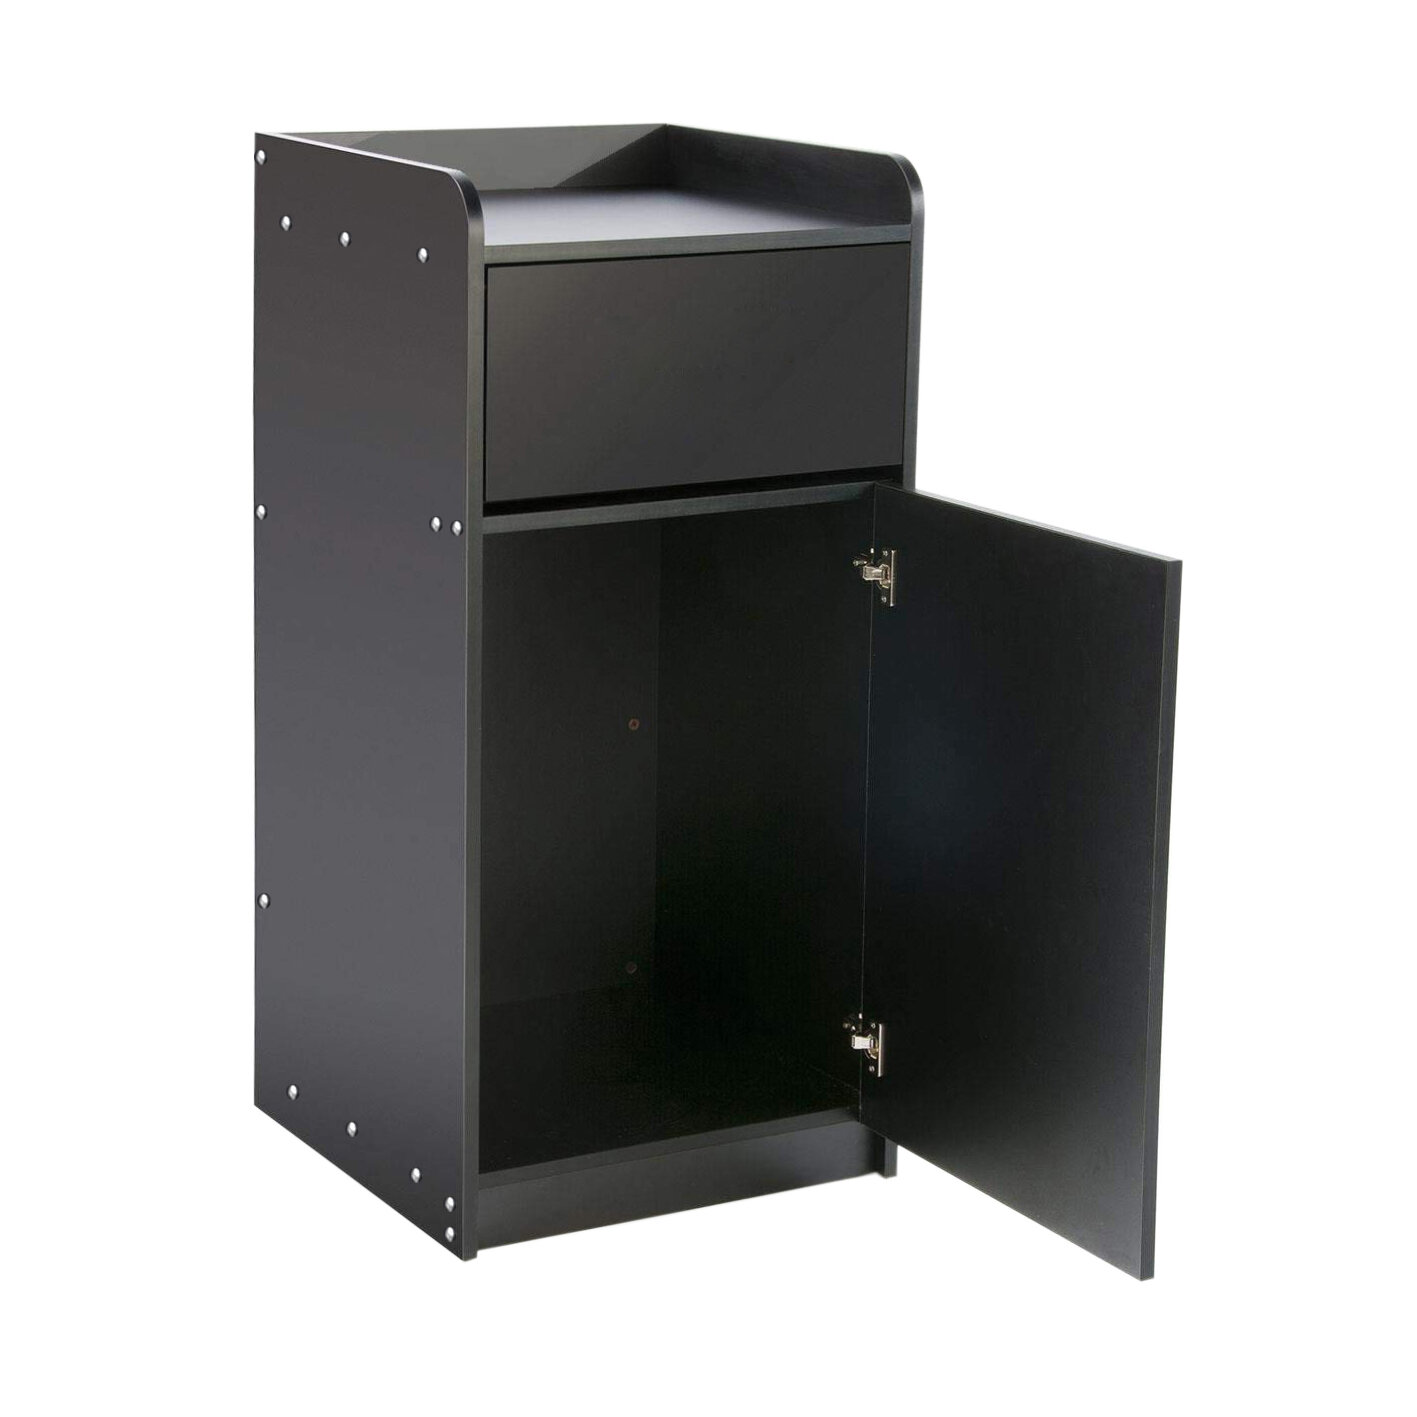 39-Gallon Stainless Steel Trash Receptacle with Tray Top